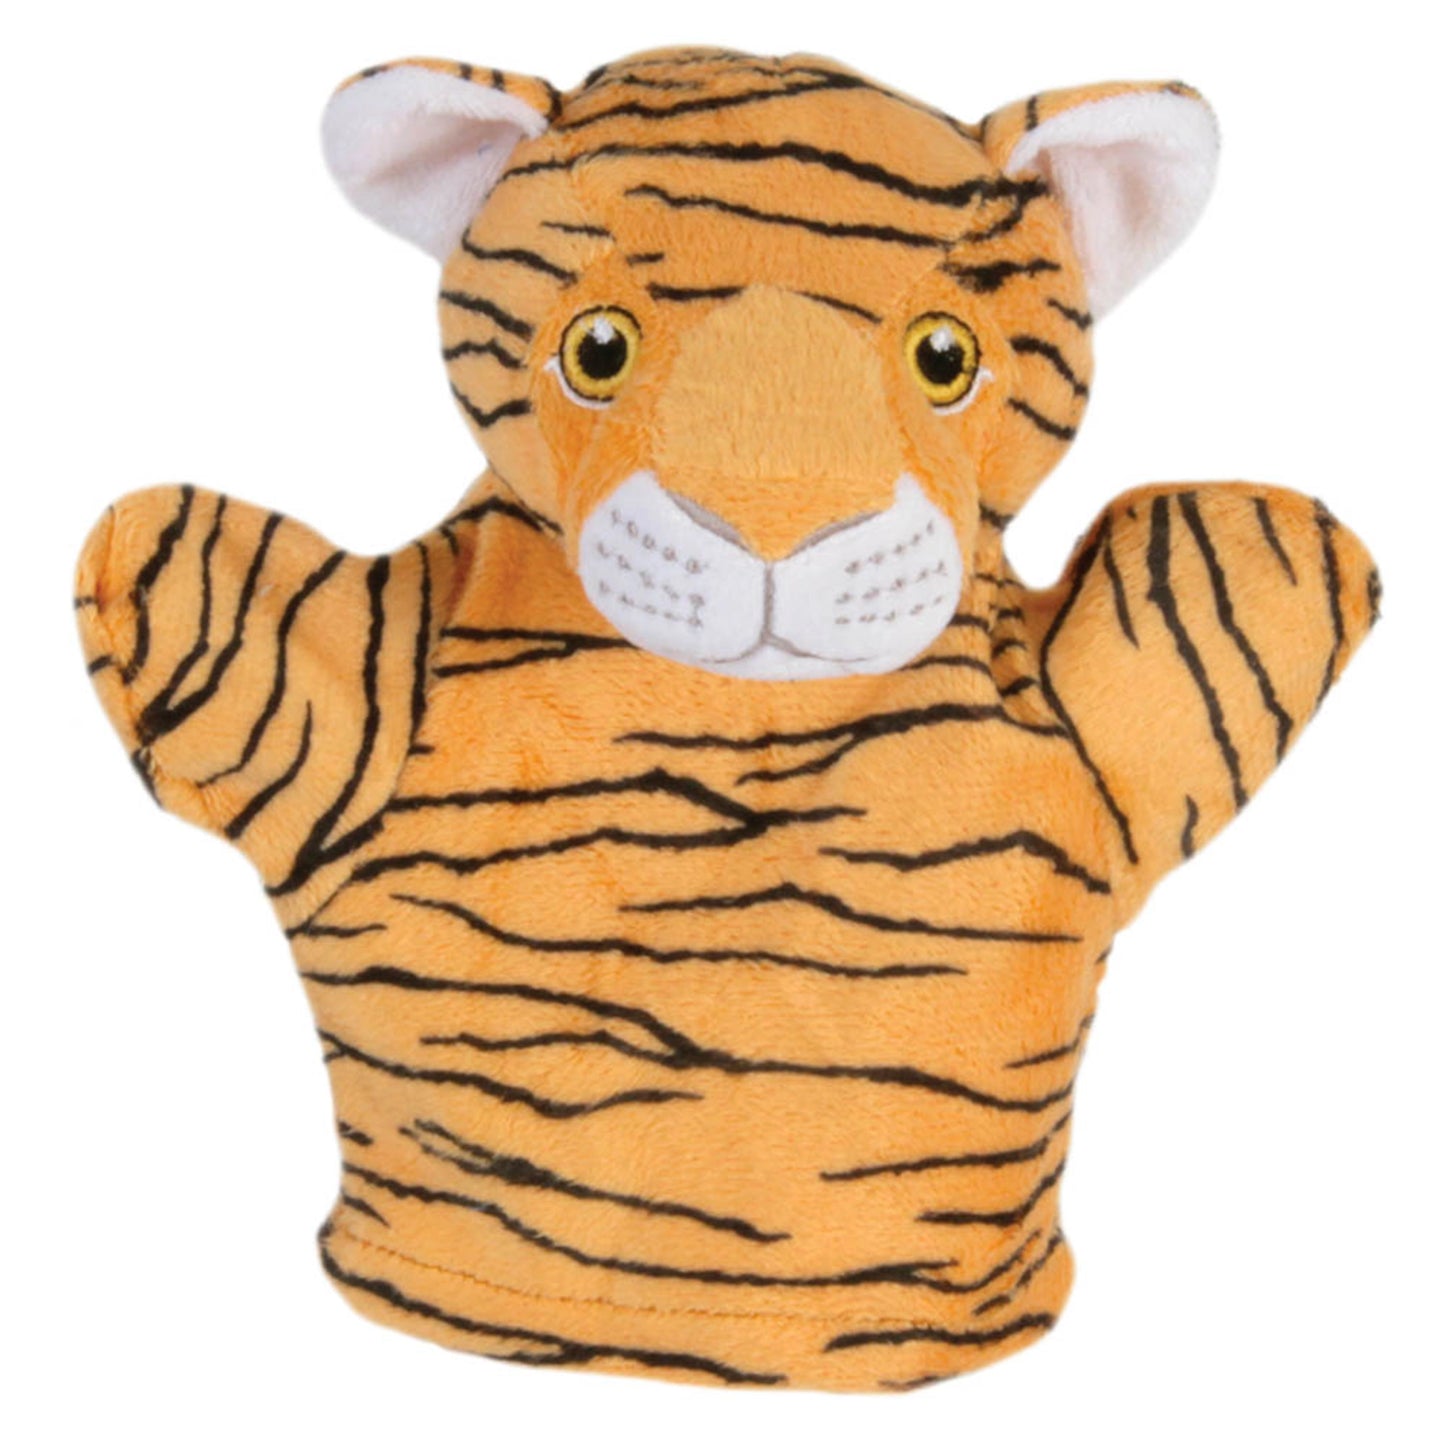 My First Puppet - Tiger - The Puppet Company - The Forgotten Toy Shop